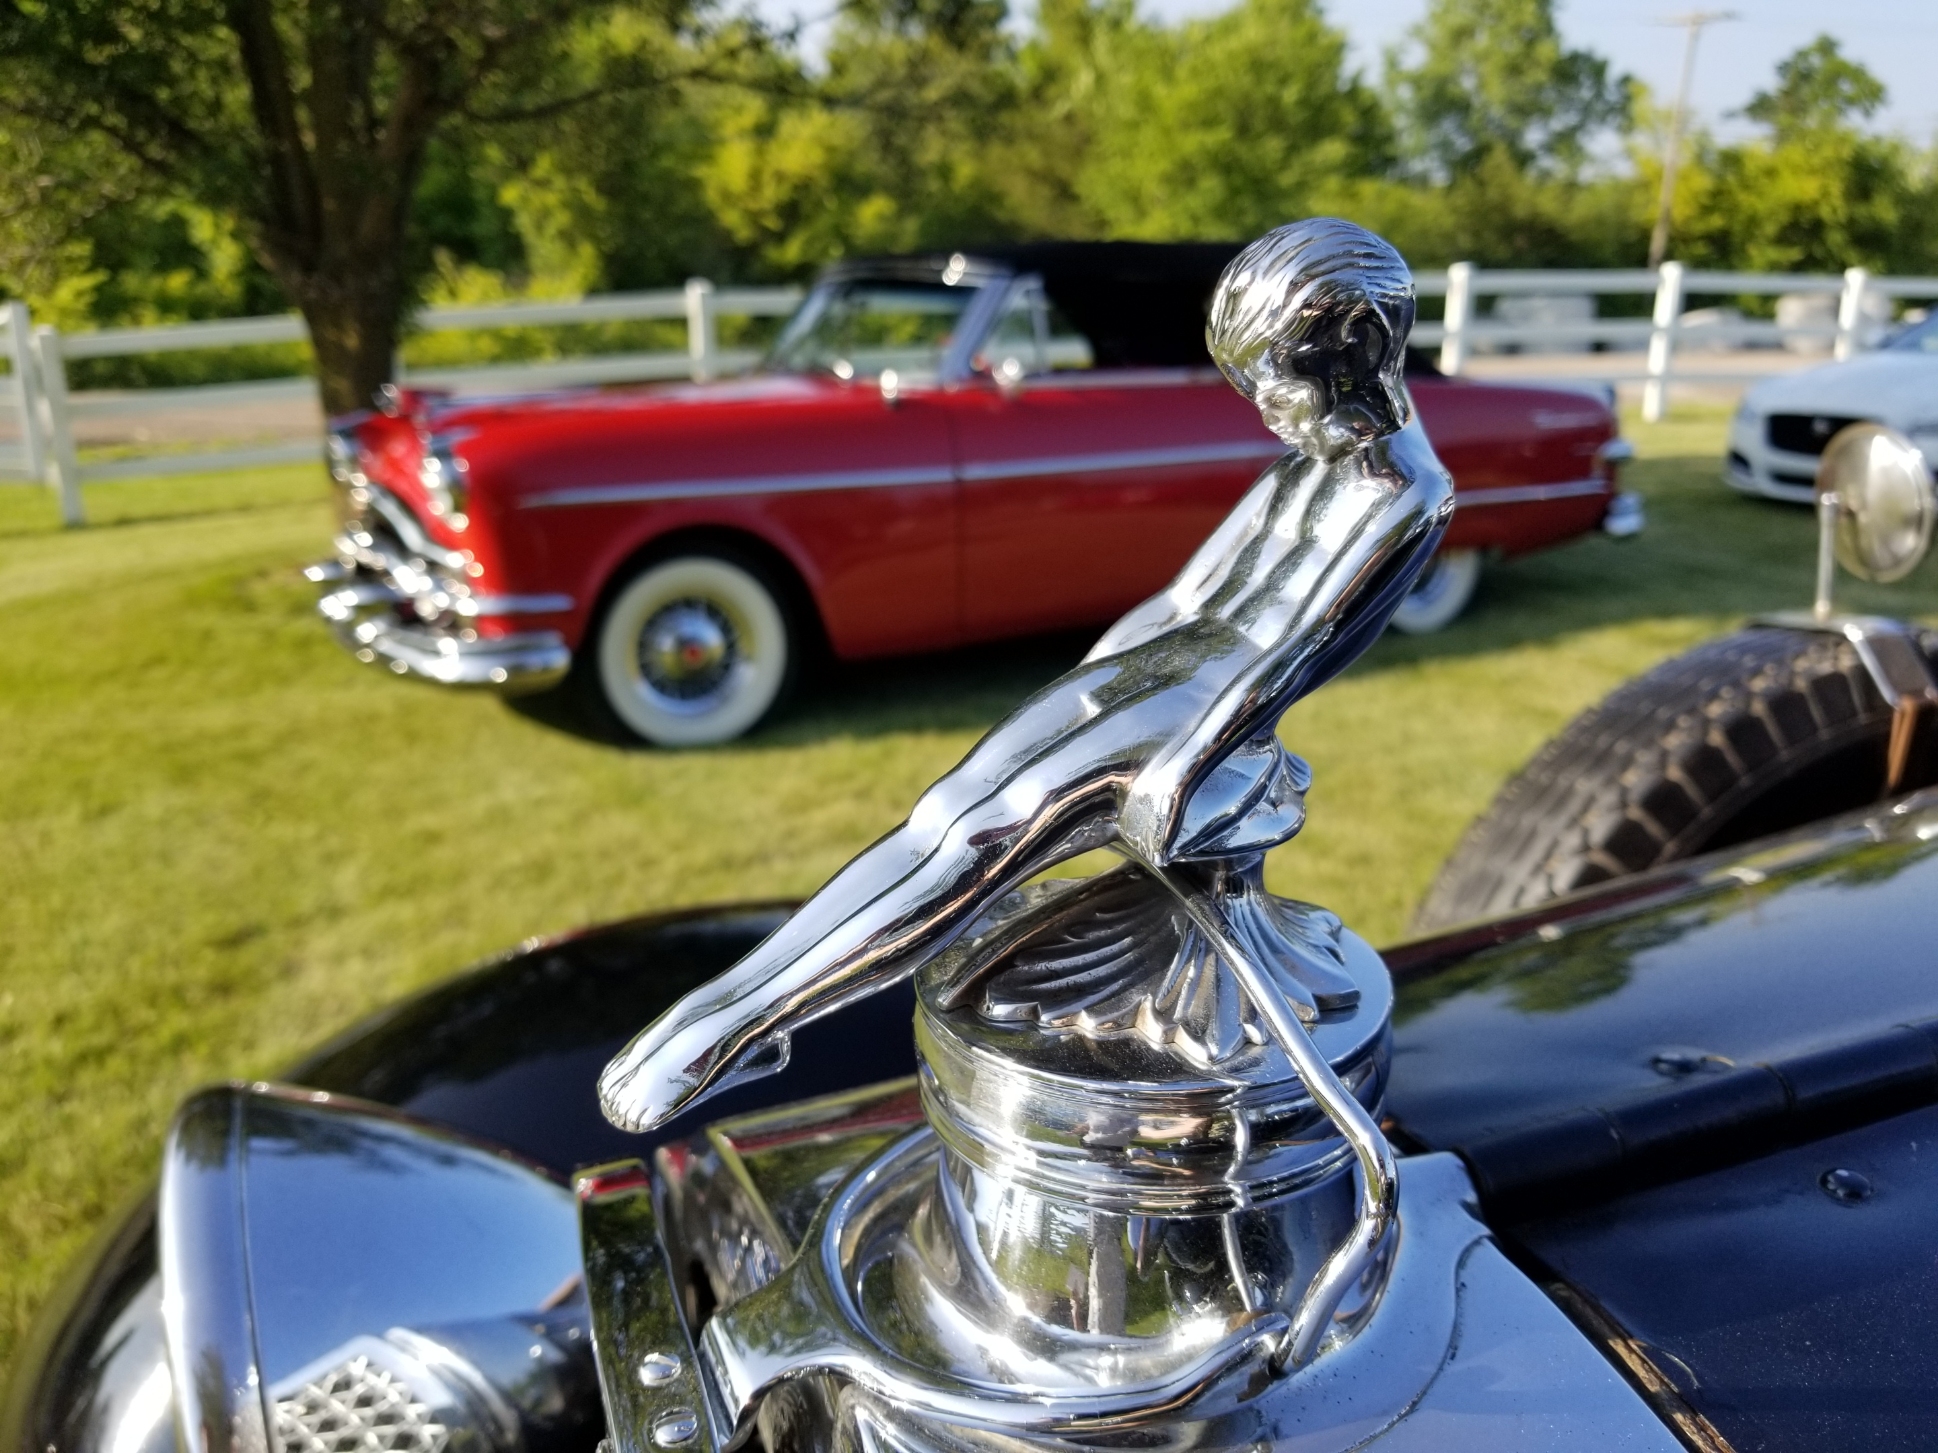 Hood Ornament of 1929 Packard 633 Runabout in front of 1954 Packard Convertible in Red